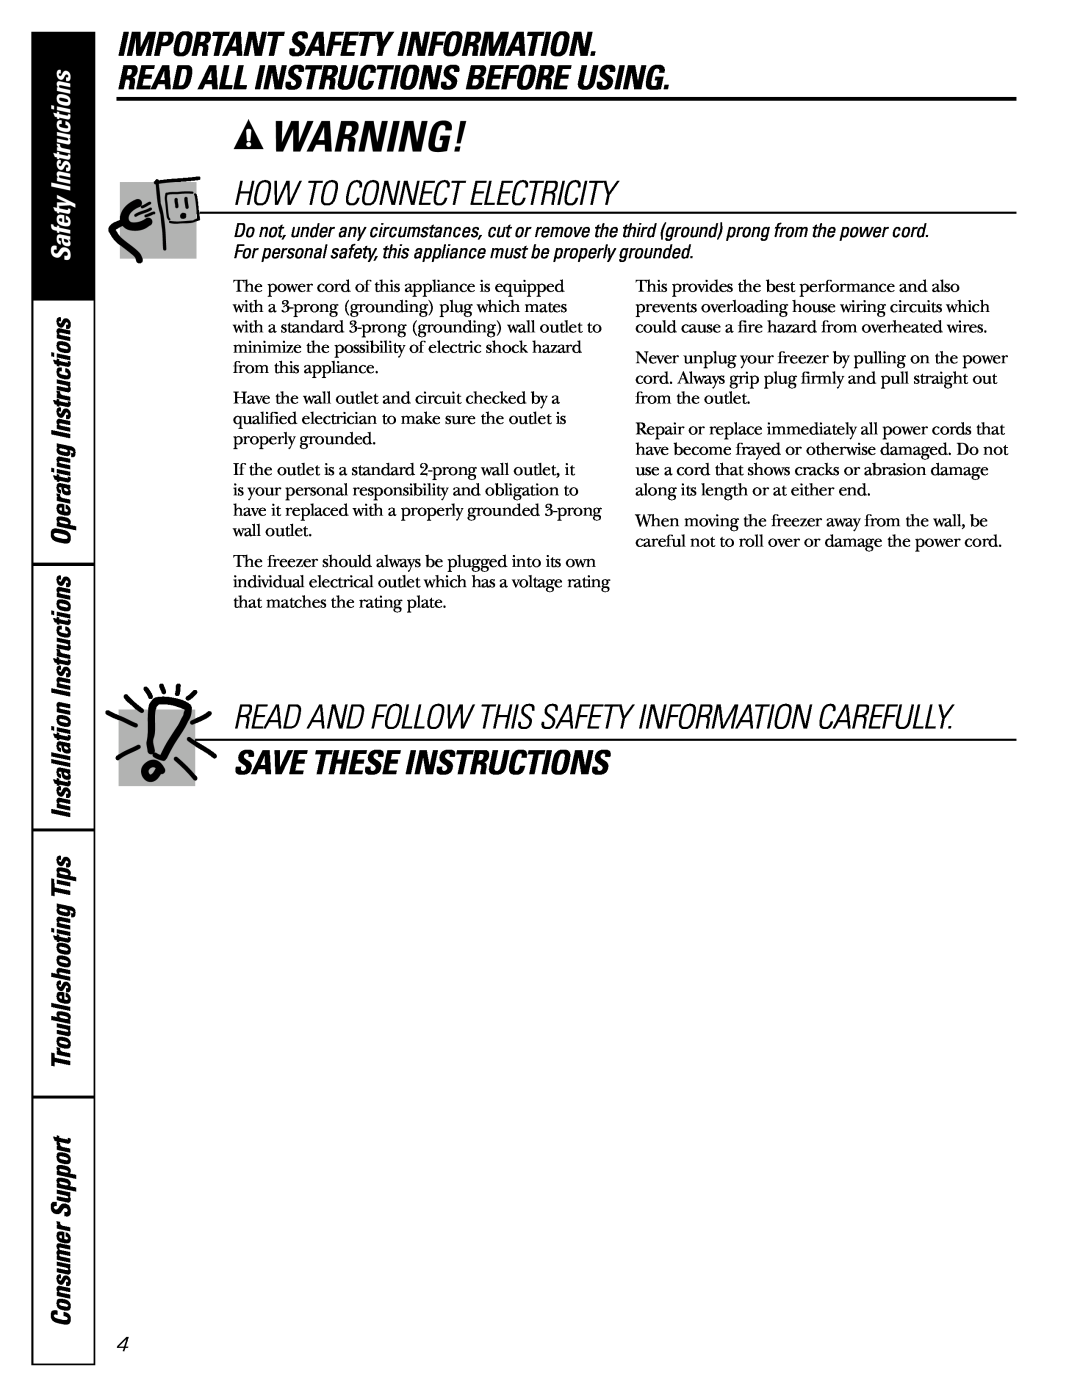 GE FCM 7 How To Connect Electricity, Save These Instructions, Instructions Operating Instructions, Safety Instructions 